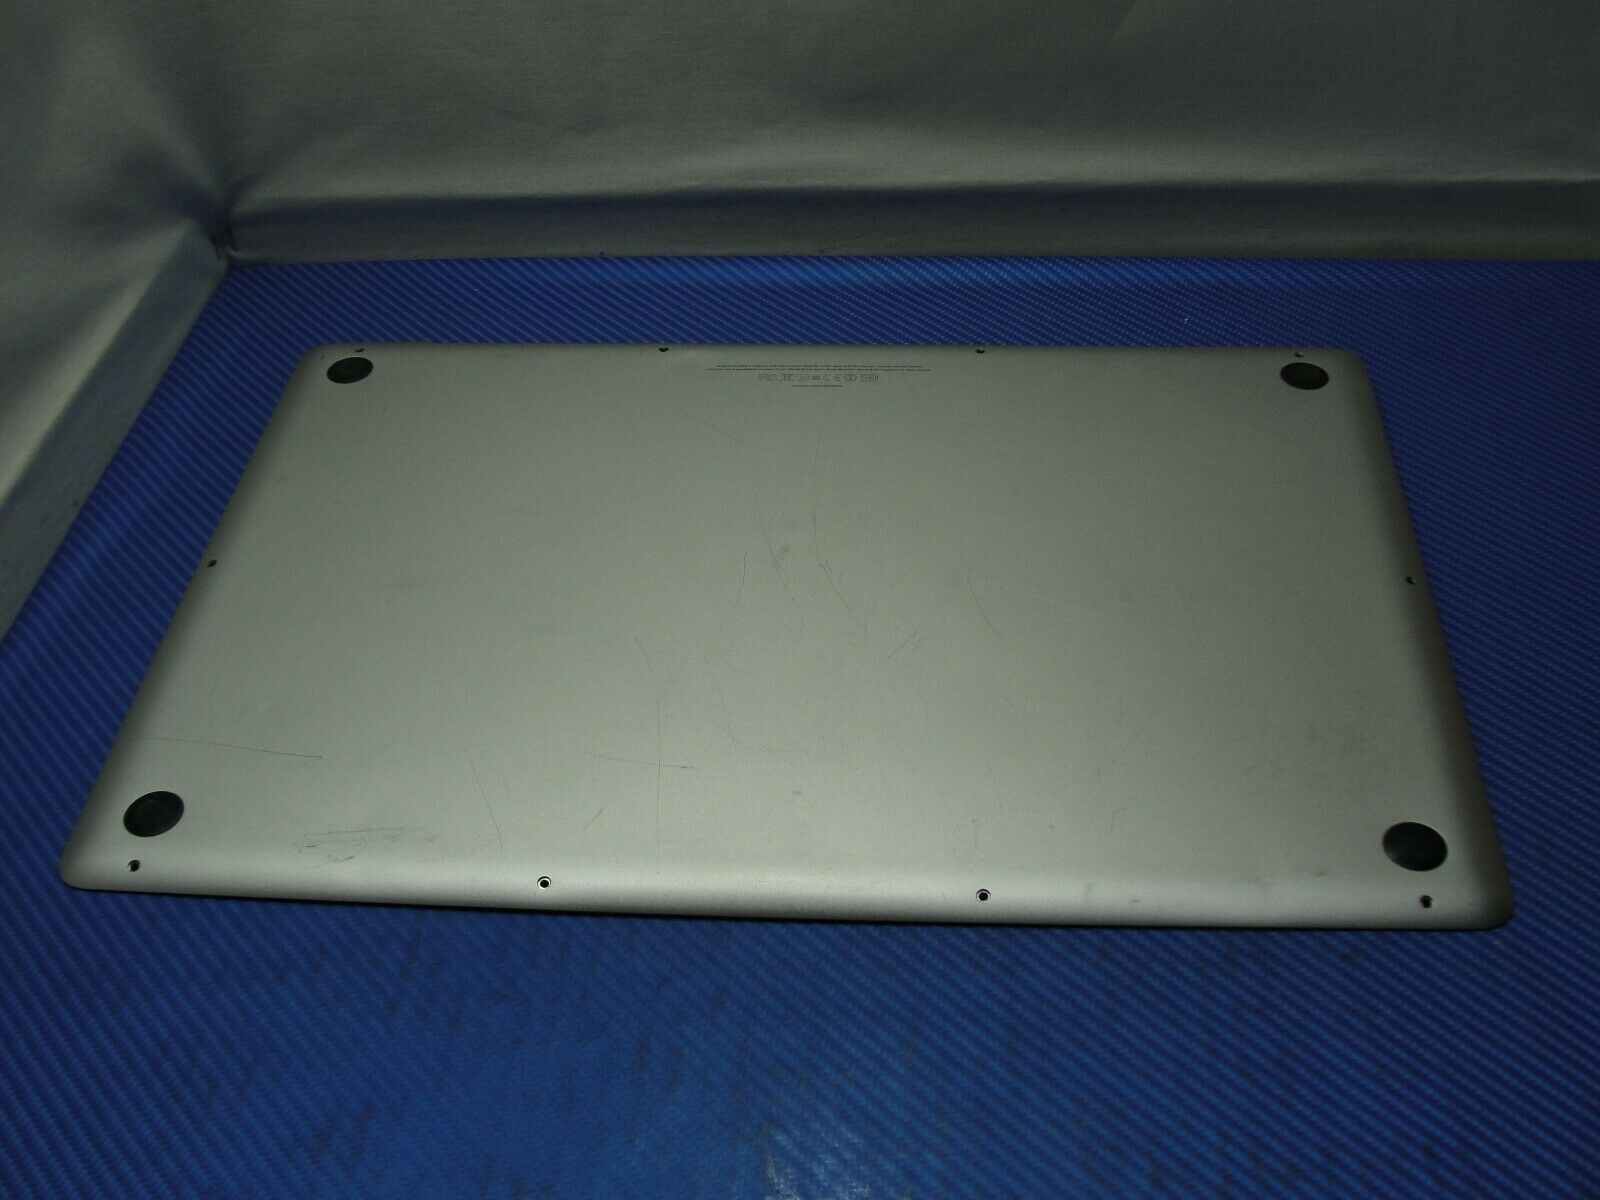 MacBook Pro A1297 MD311LL/A Late 2011 17" Genuine Housing Bottom Case 922-9828 Apple